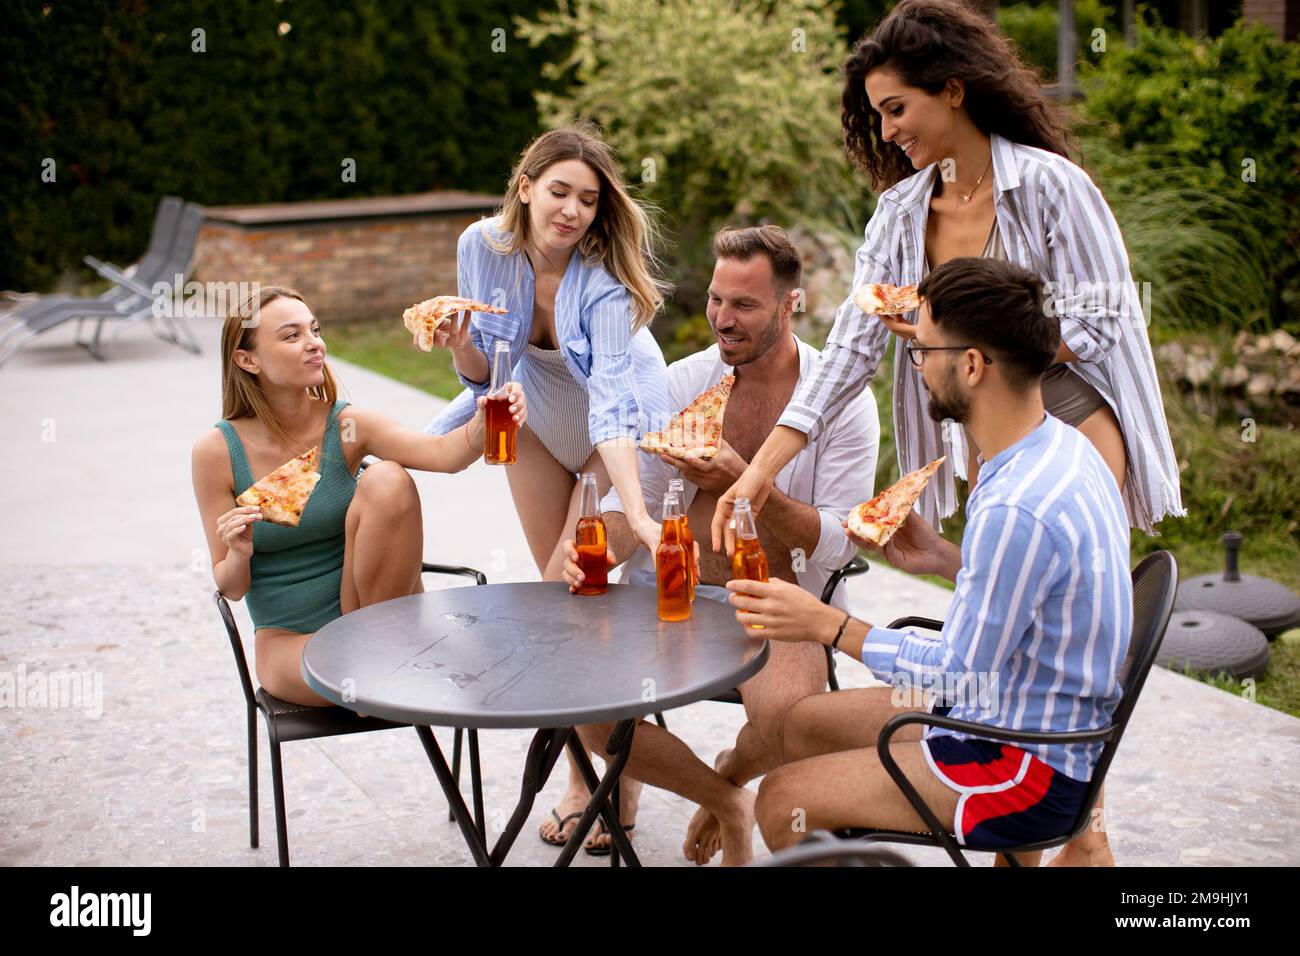 Group of happy young people cheering with cider and eating pizza by the pool in the garden Stock Photo